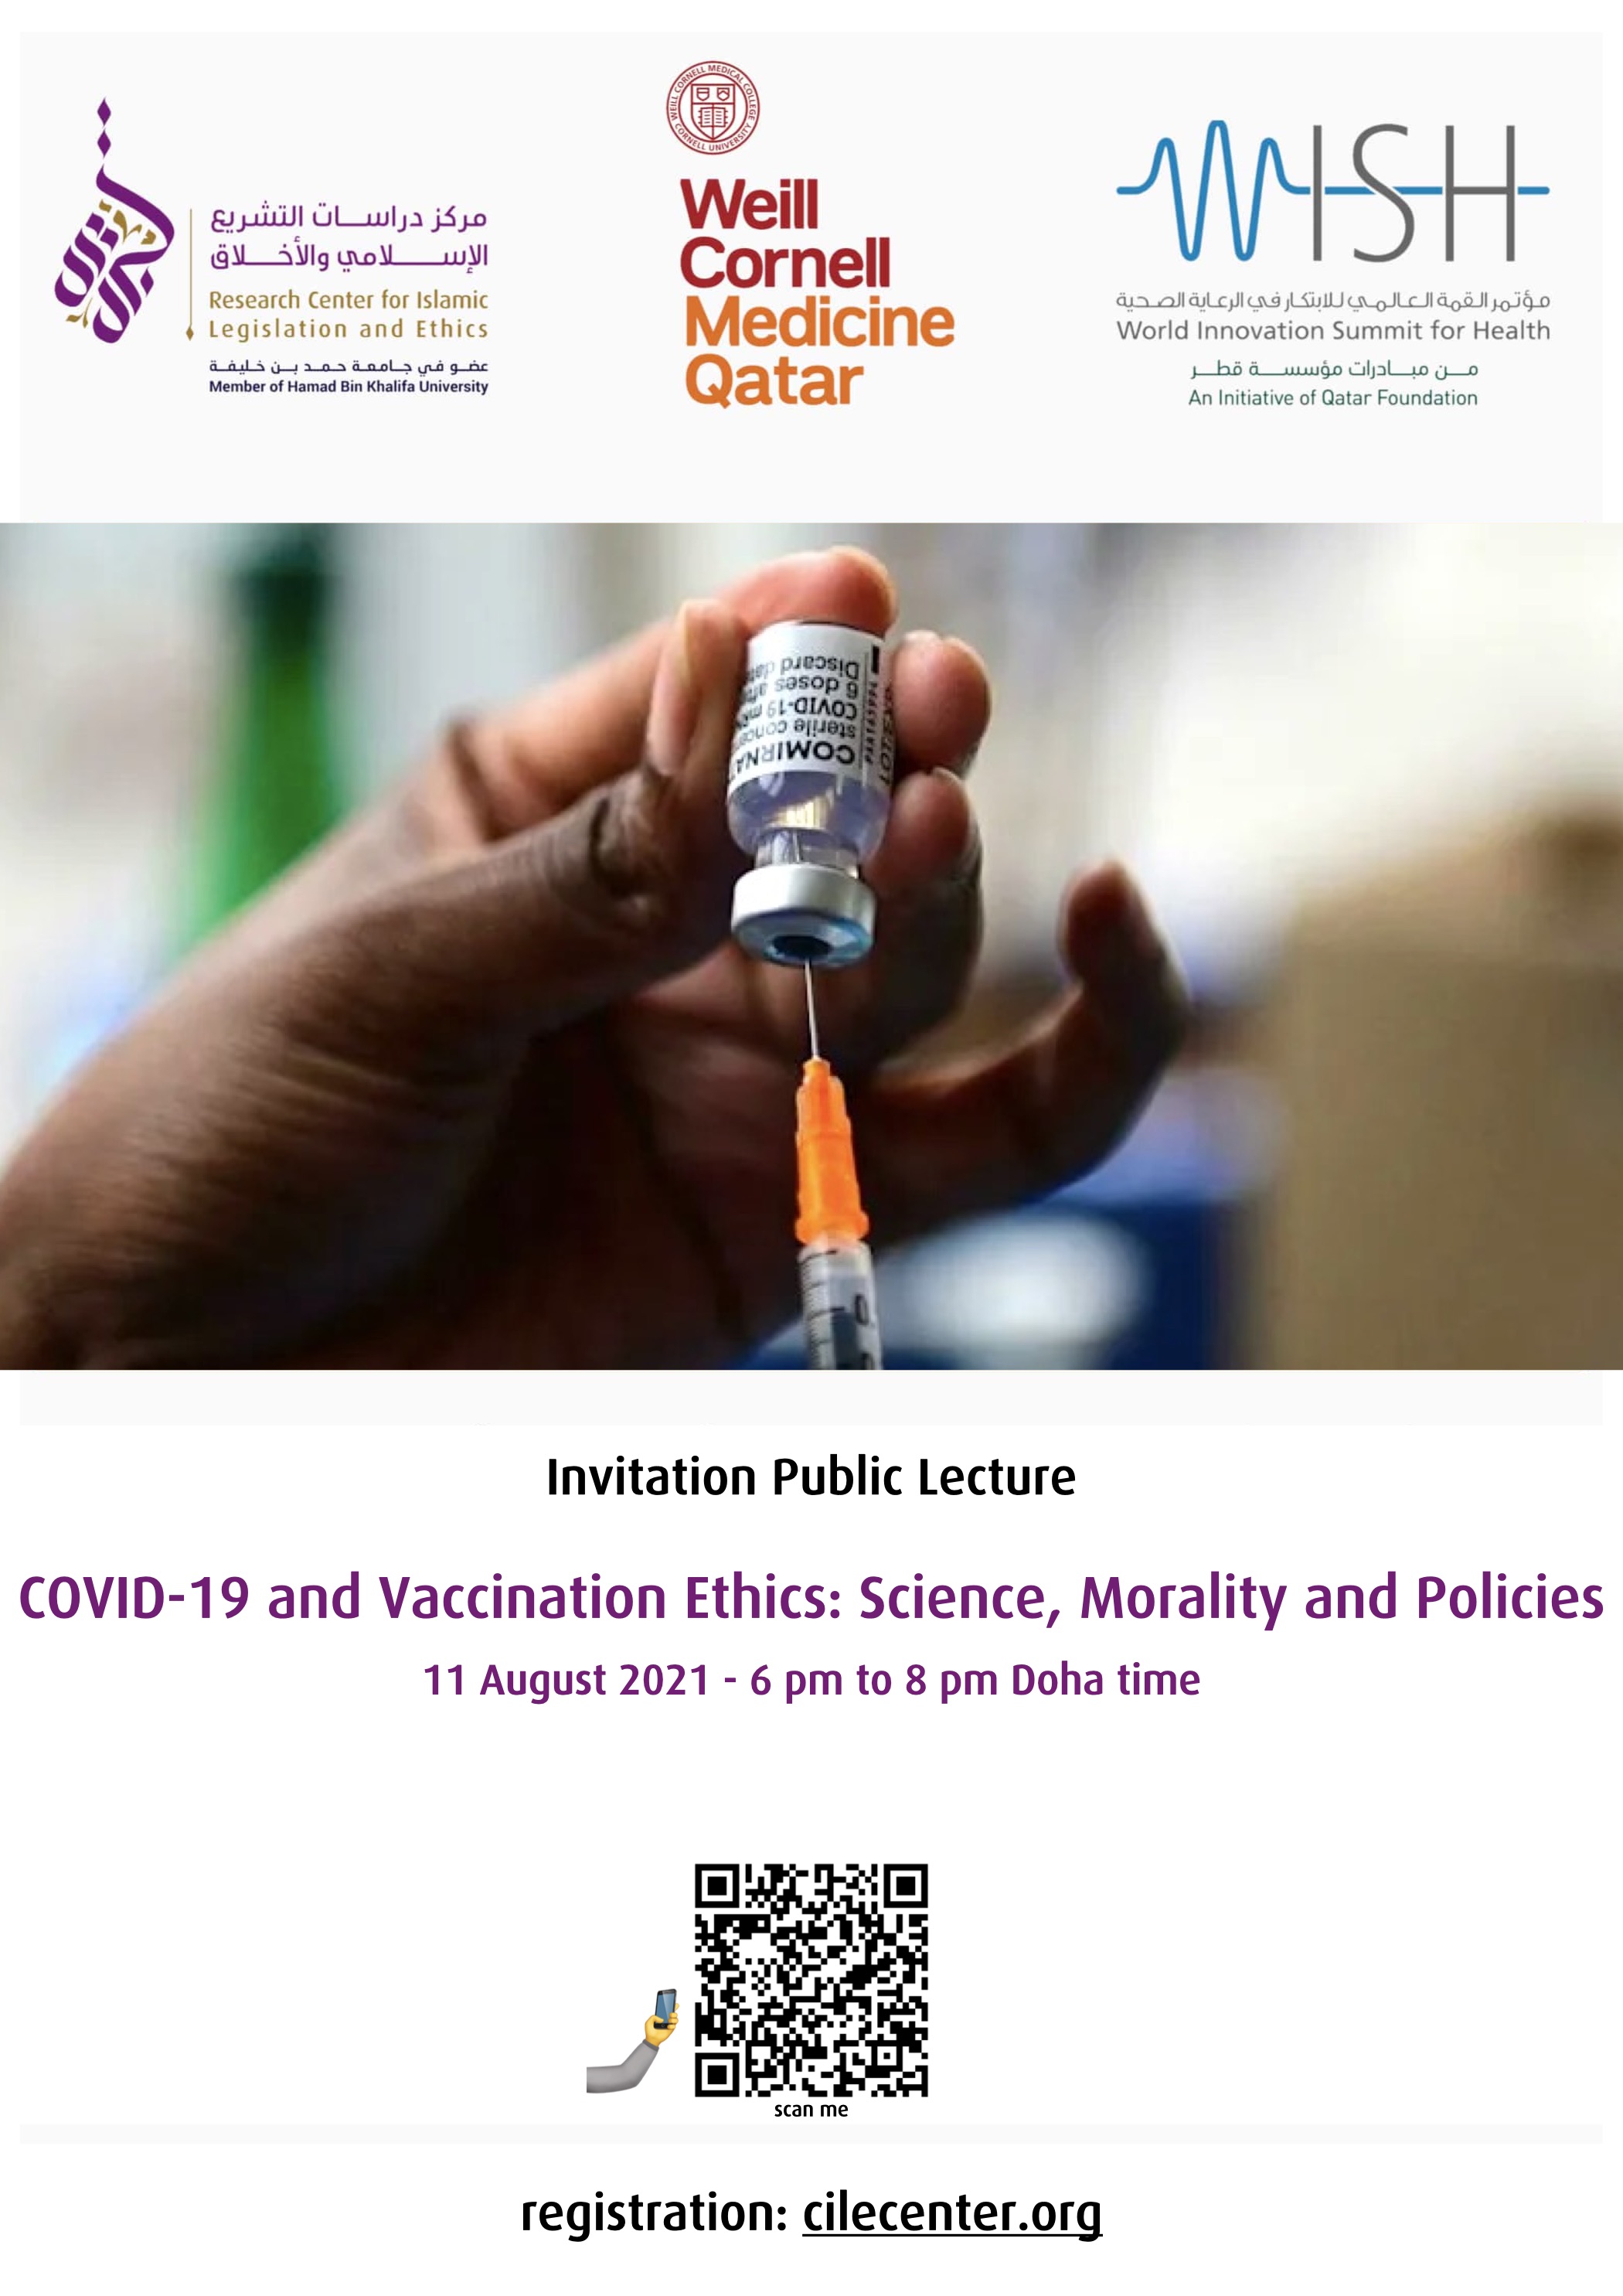 08/2021 Lecture "COVID-19 and Vaccination Ethics: Science, Morality and Policies"